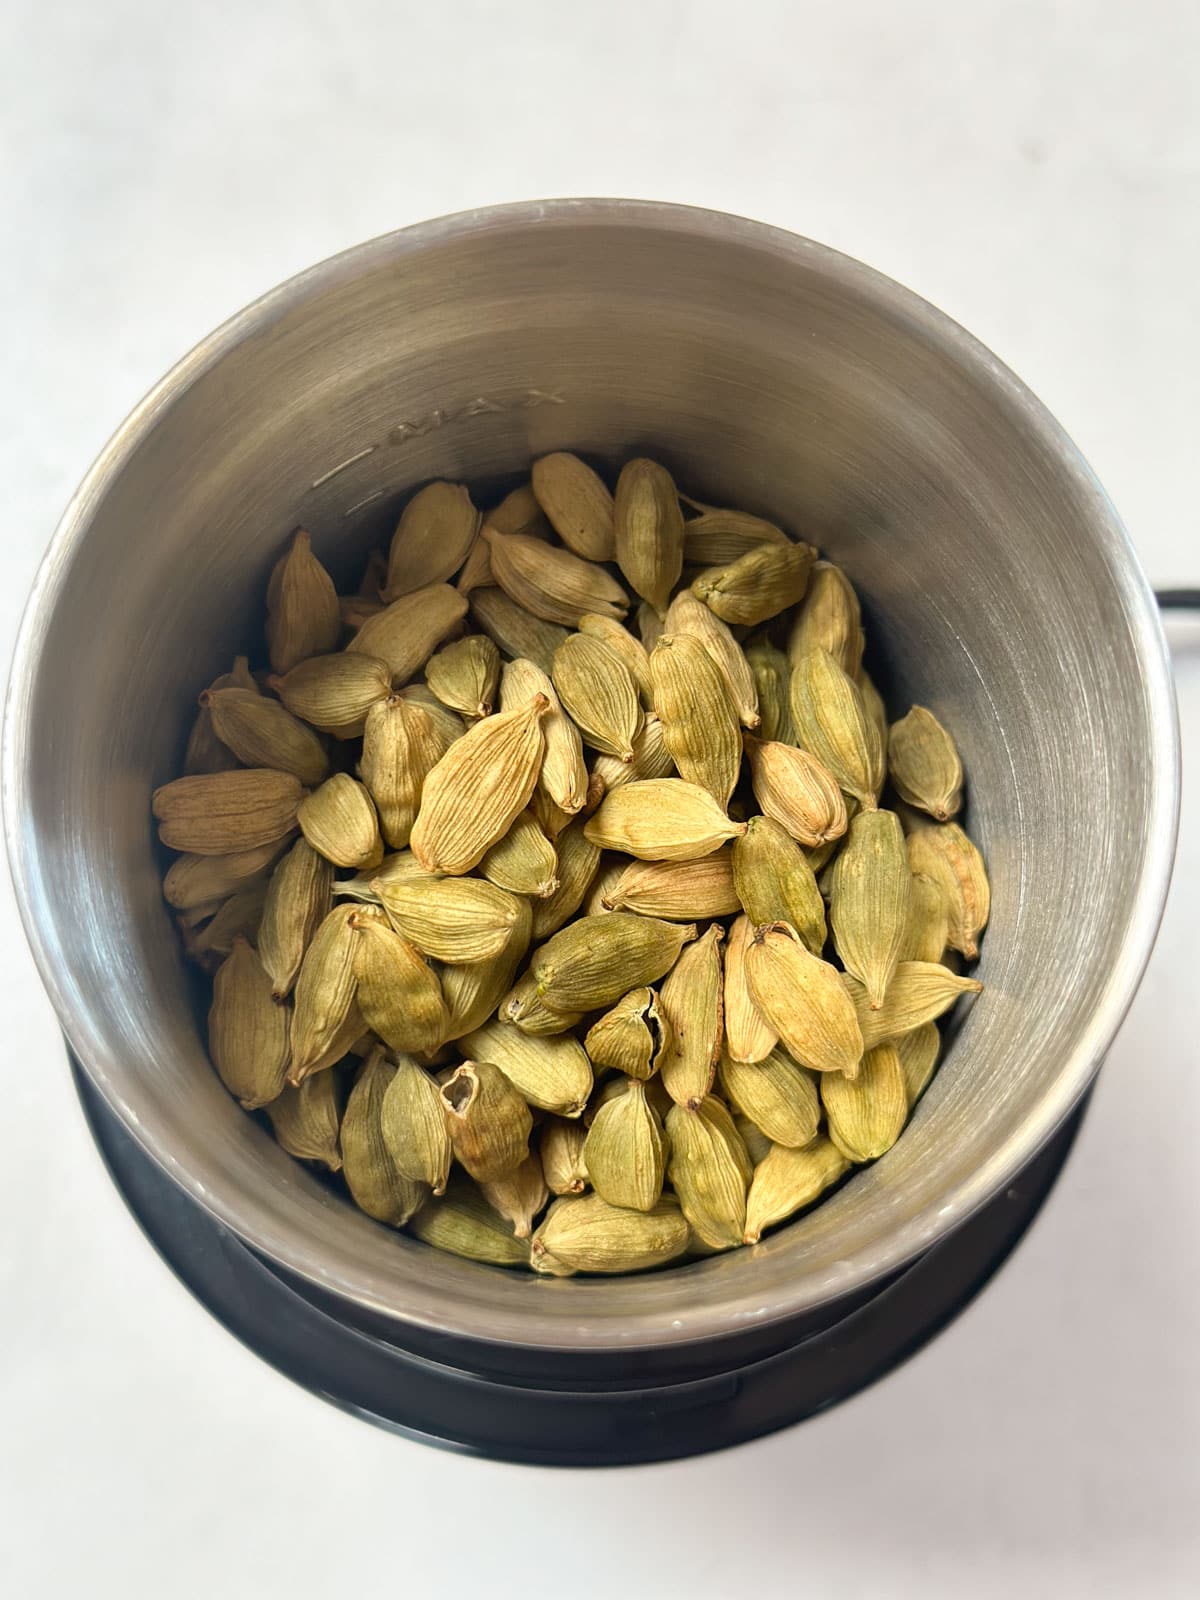 Green Cardamom pods in a spice grinder ready to grind